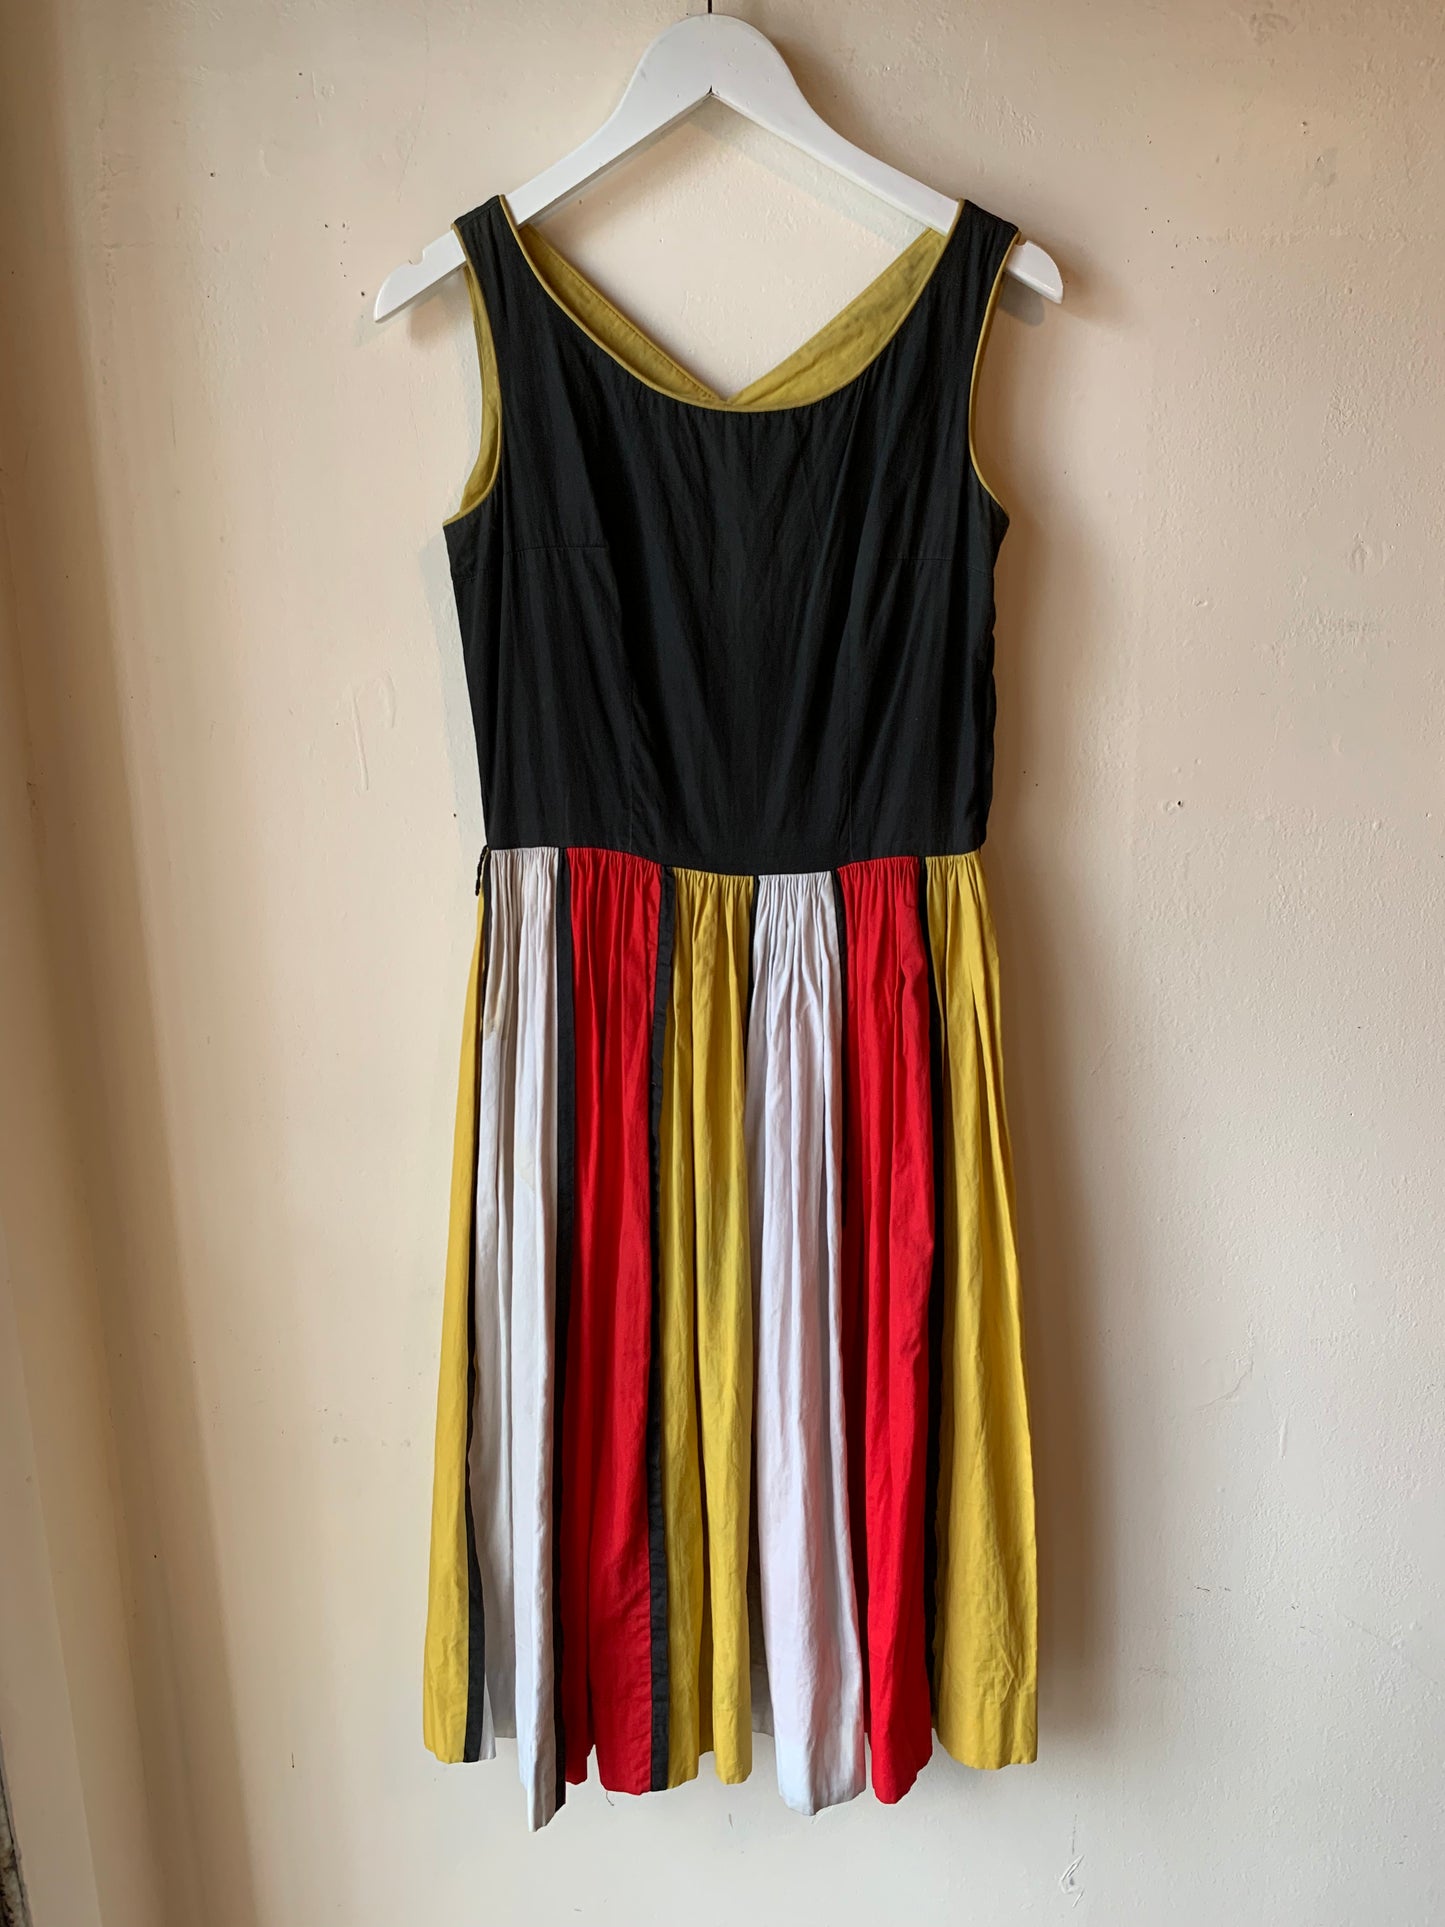 50s/60s Black Red Yellow & White Colorblock Dress (S/M)